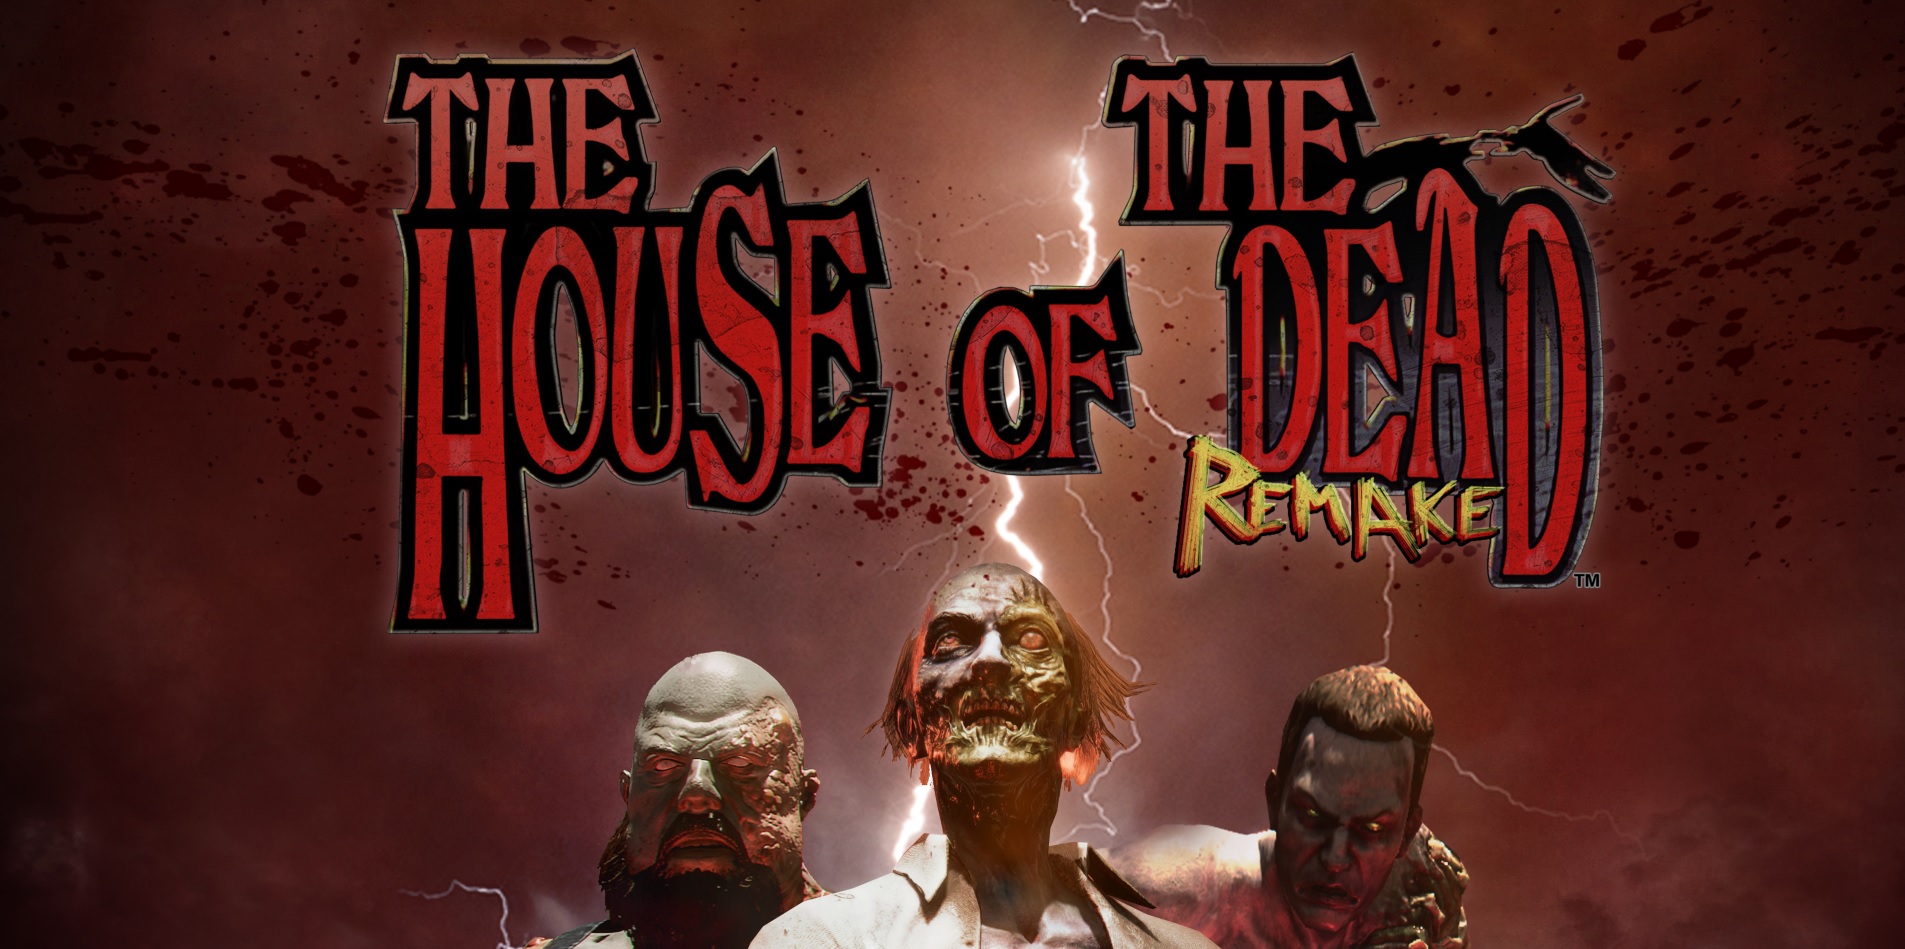 THE HOUSE OF THE DEAD: Remake chega ao Nintendo Switch